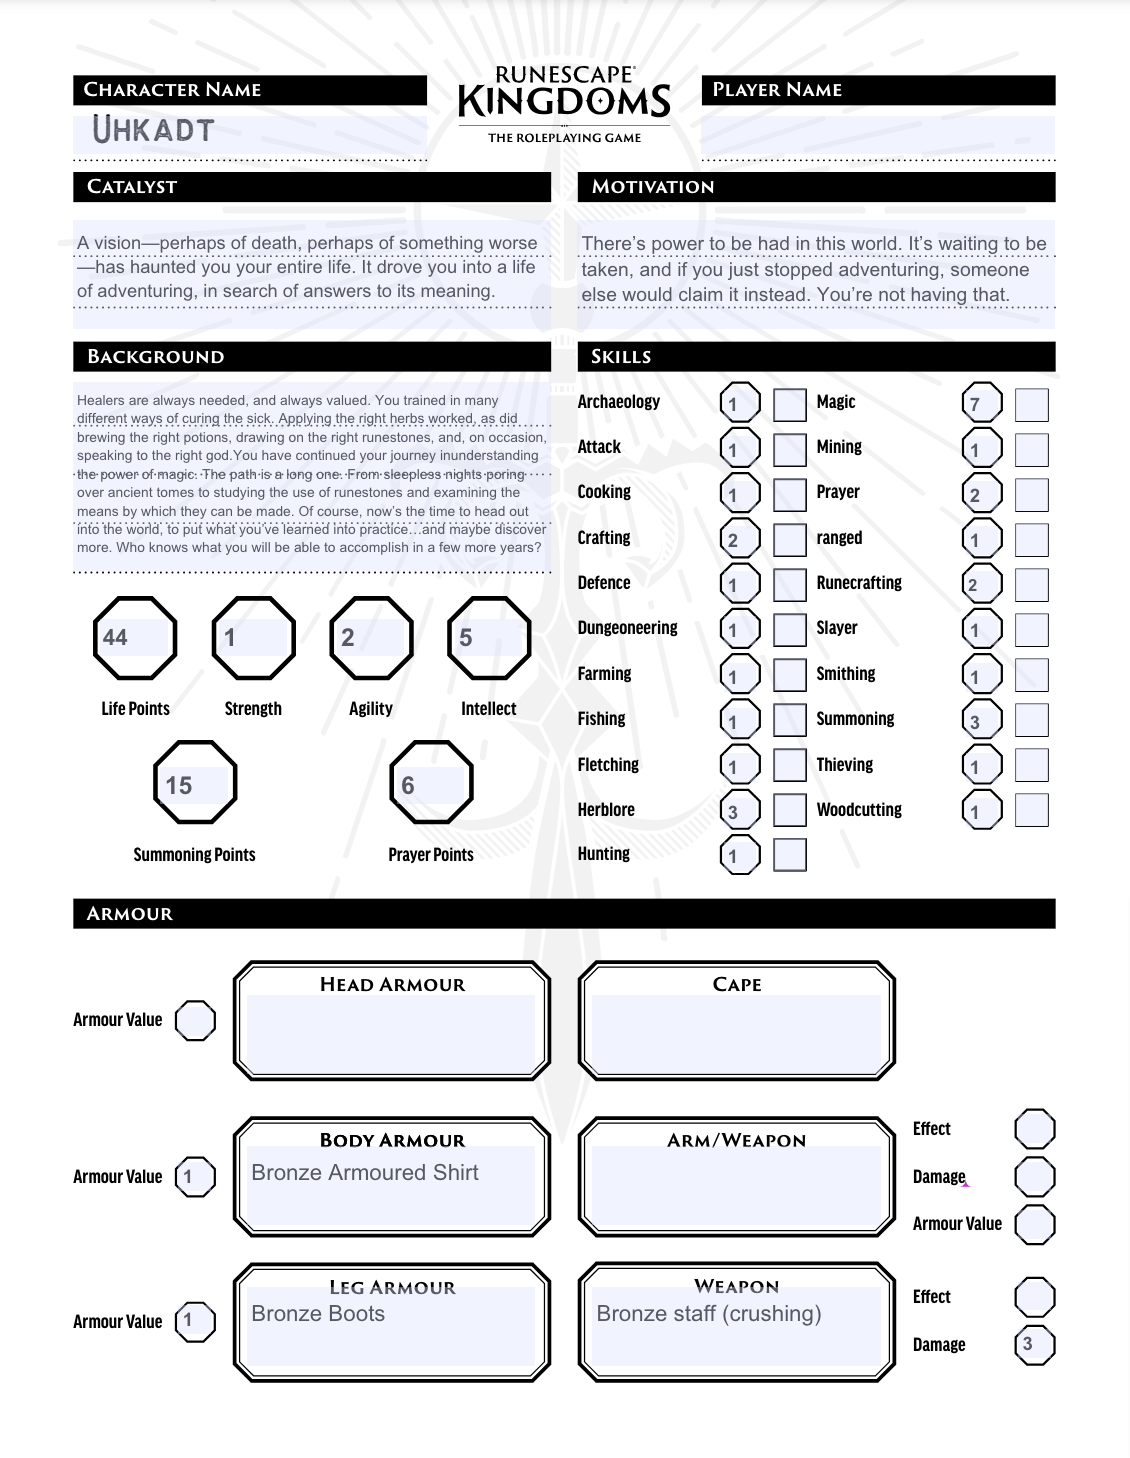 RuneScape Kingdoms: Roleplaying Game Character Sheet - Uhkadt - Apprentice Wizard Travelling Healer (PDF)